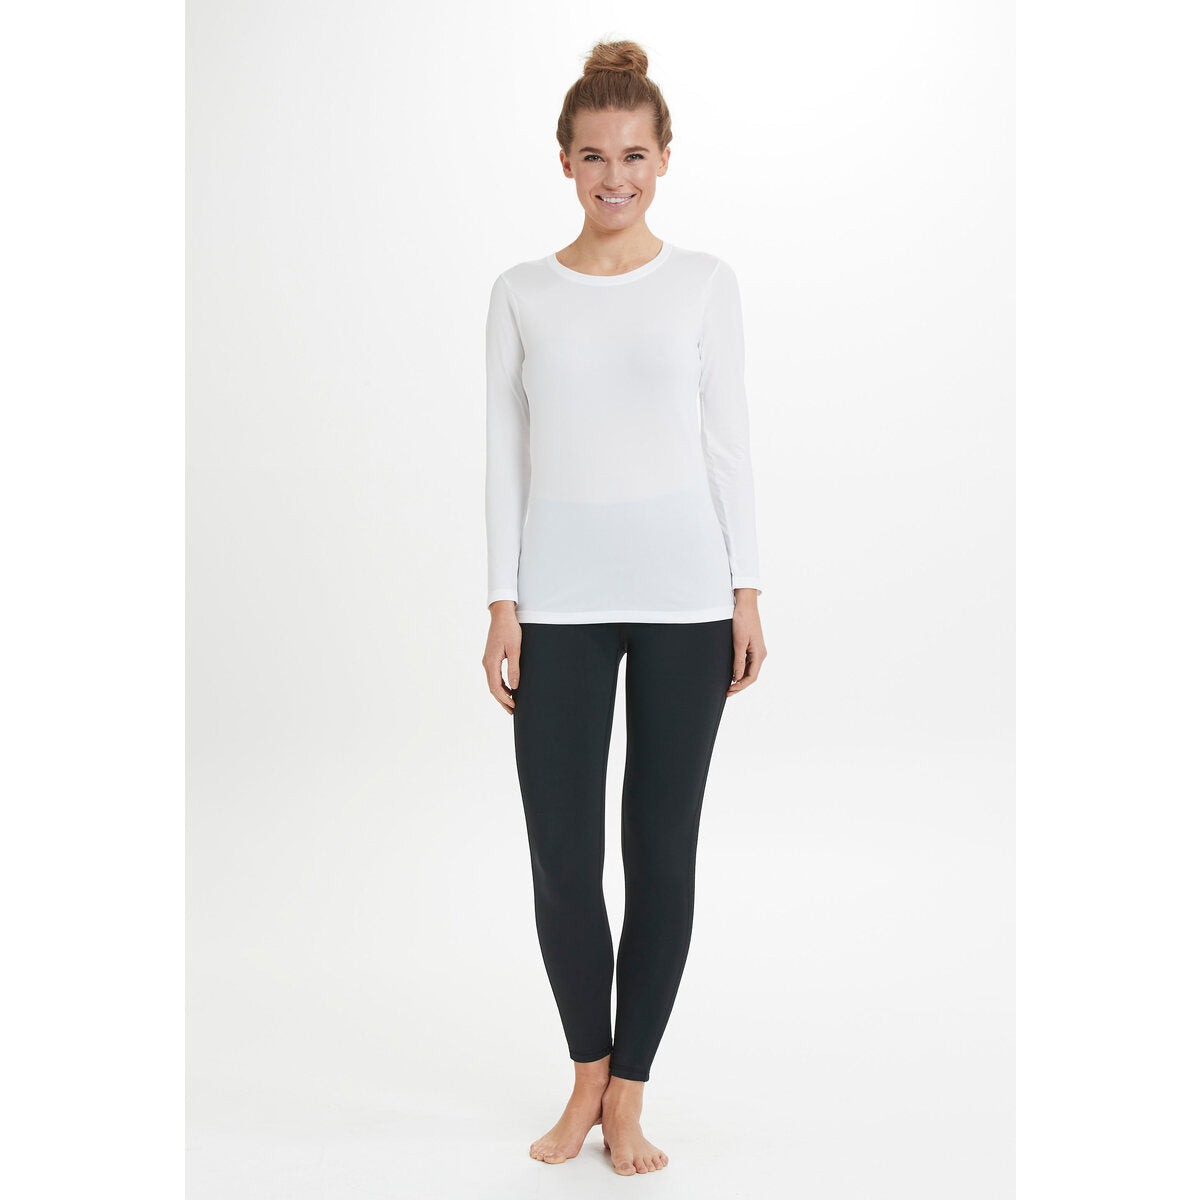 Athlecia Julee Womenswear Loose Fit Long Sleeve Seamless Tee - White 3 Shaws Department Stores